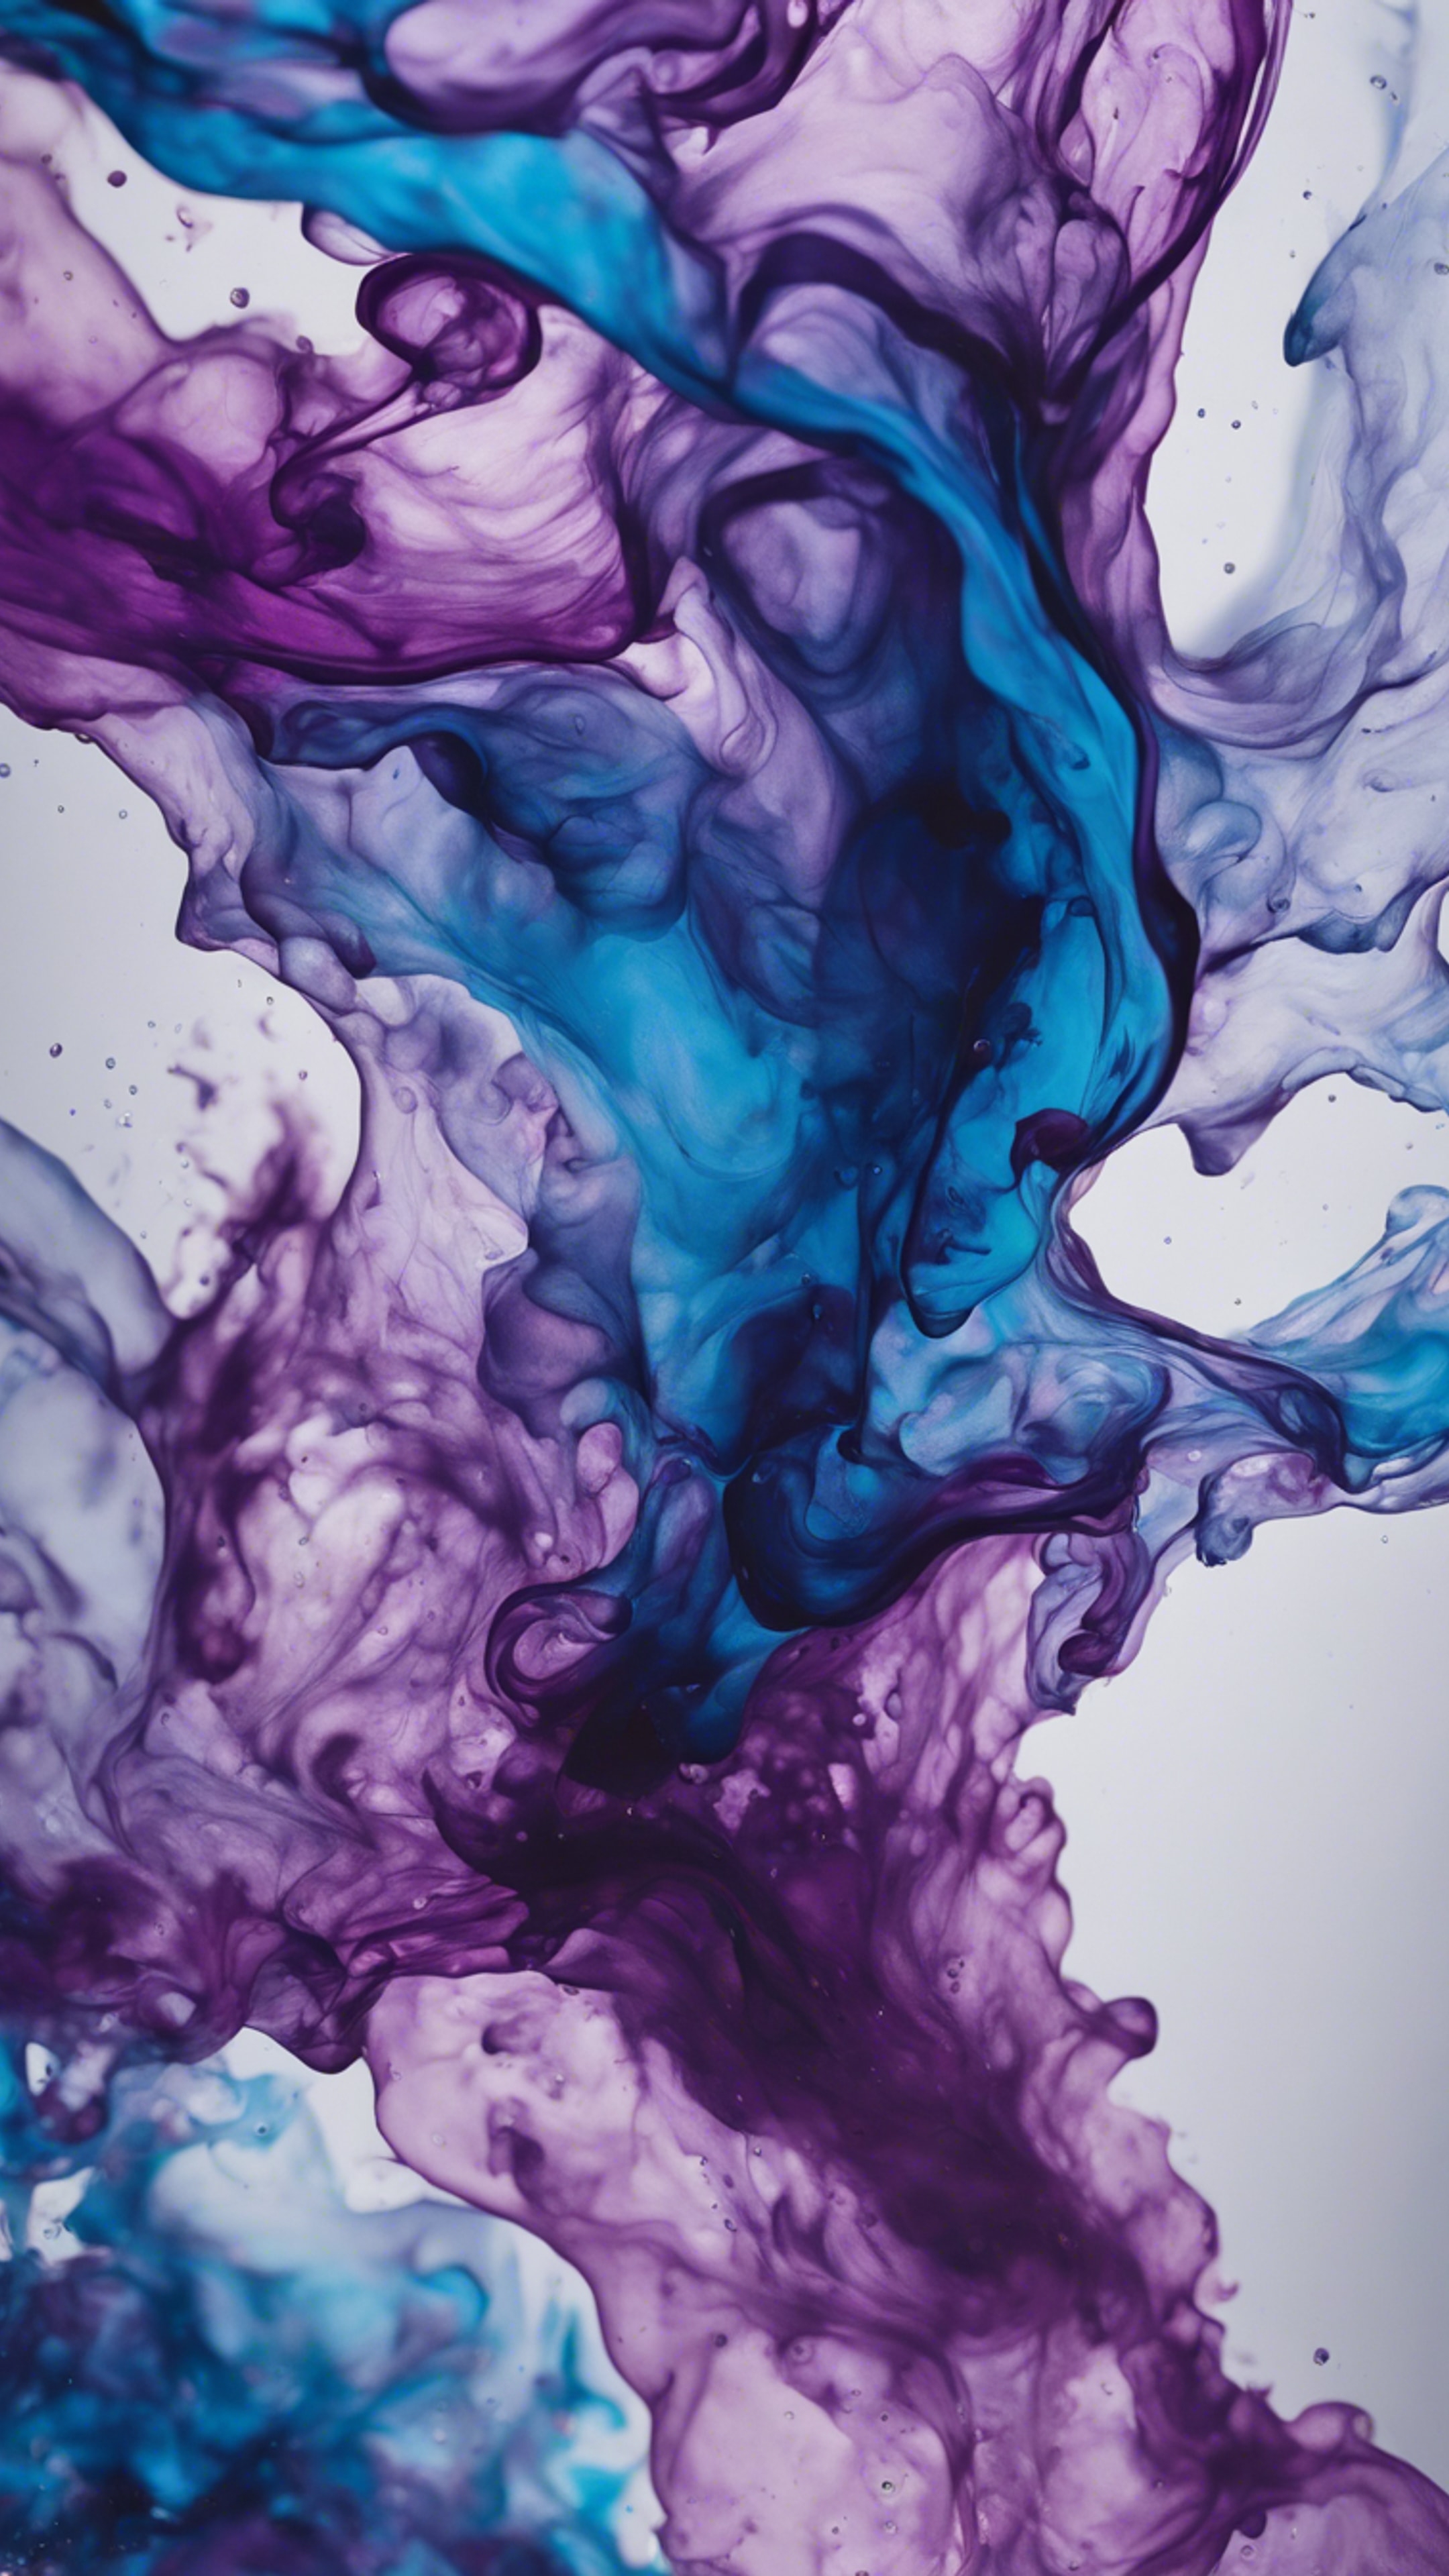 An abstract fluid art piece with swirling waves of ink in hues of cool blue and passionate purple. วอลล์เปเปอร์[1f0e9ffb93e84991a030]